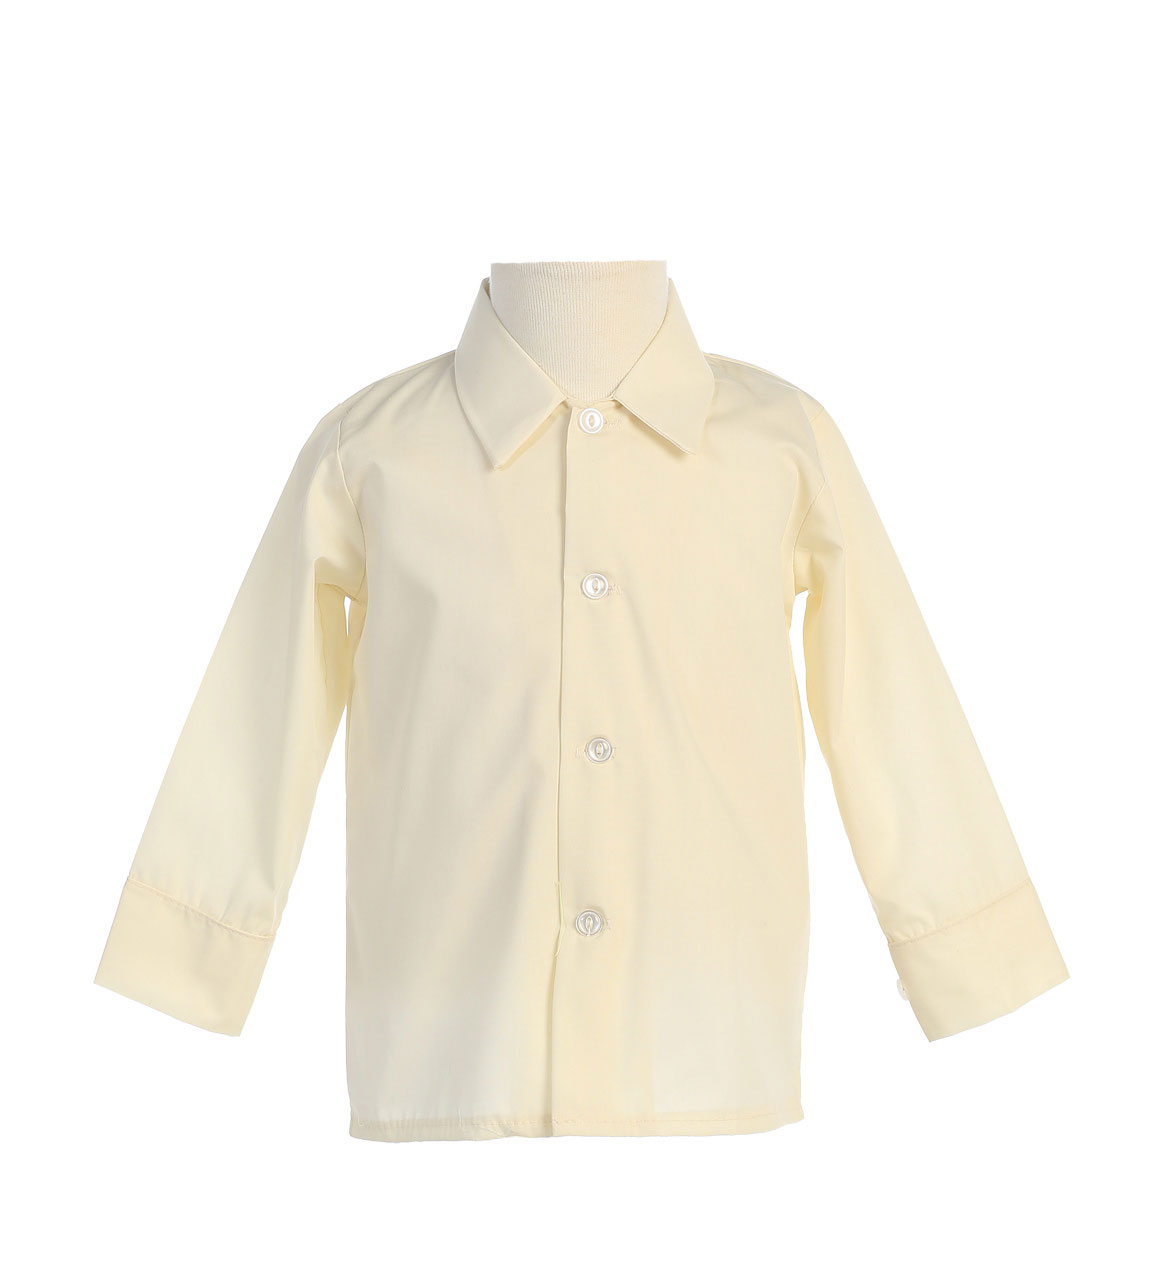 Boys Long Sleeved Simple Dress Shirt - Available in Ivory 6